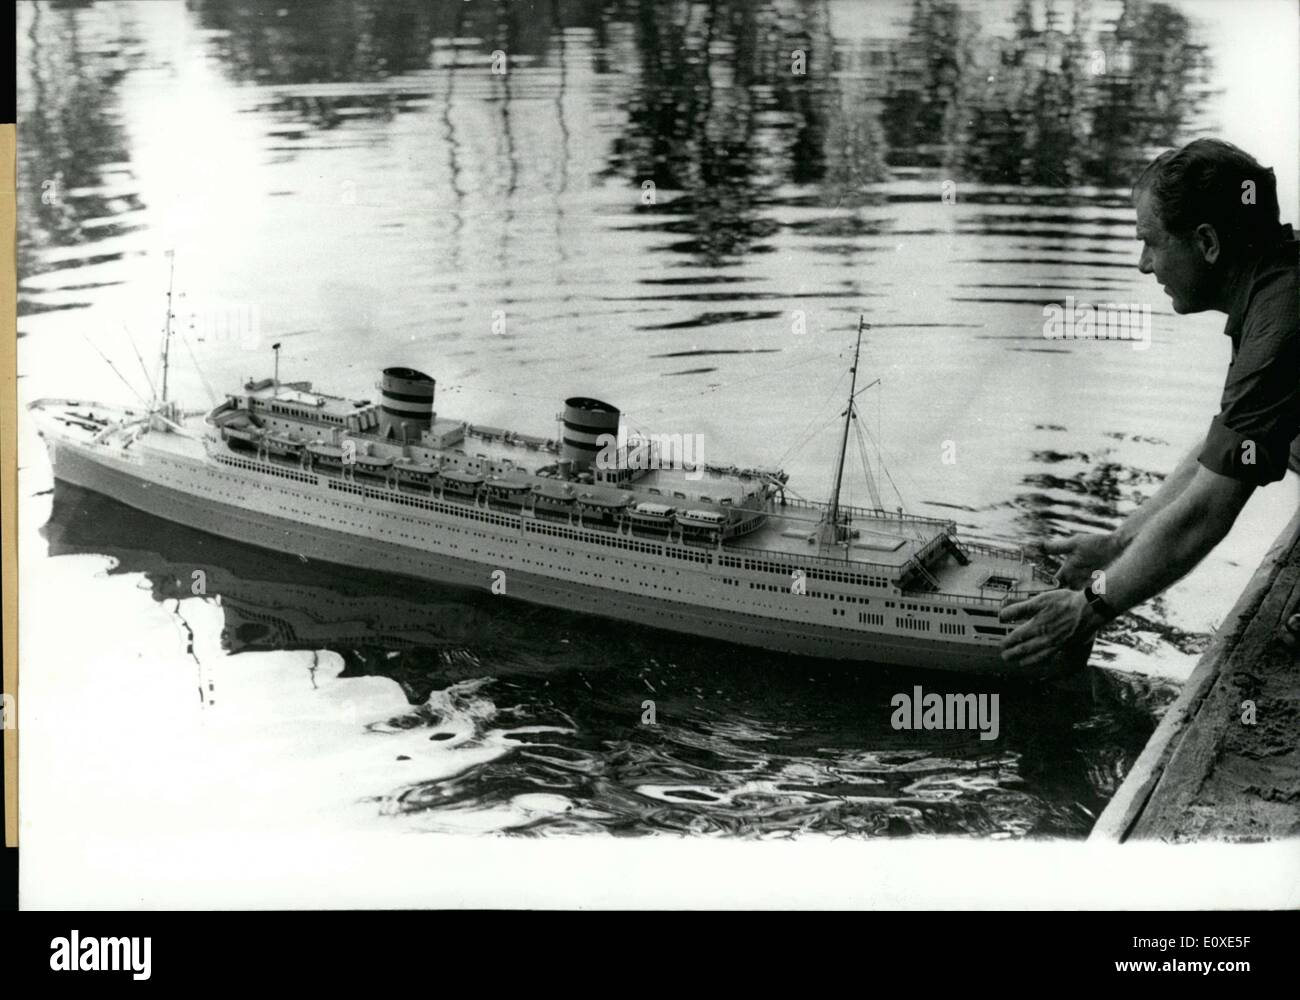 Jul. 06, 1966 - This photo wasn't taken on the high seas, but rather in a N?rnberg pond. Hans M?nch has recreated the true-to-scale ''Nieuw Amsterdam'' cruise liner. It is 2.31 meters long and a model of the Holland-America liner. Hans, who is a former seaman, considers shipbuilding a hobby. The building of this boat cost him 2,000 hours of his time and ''a lot of money.'' He wants to submit it in the German Model-building Championship in September. Stock Photo